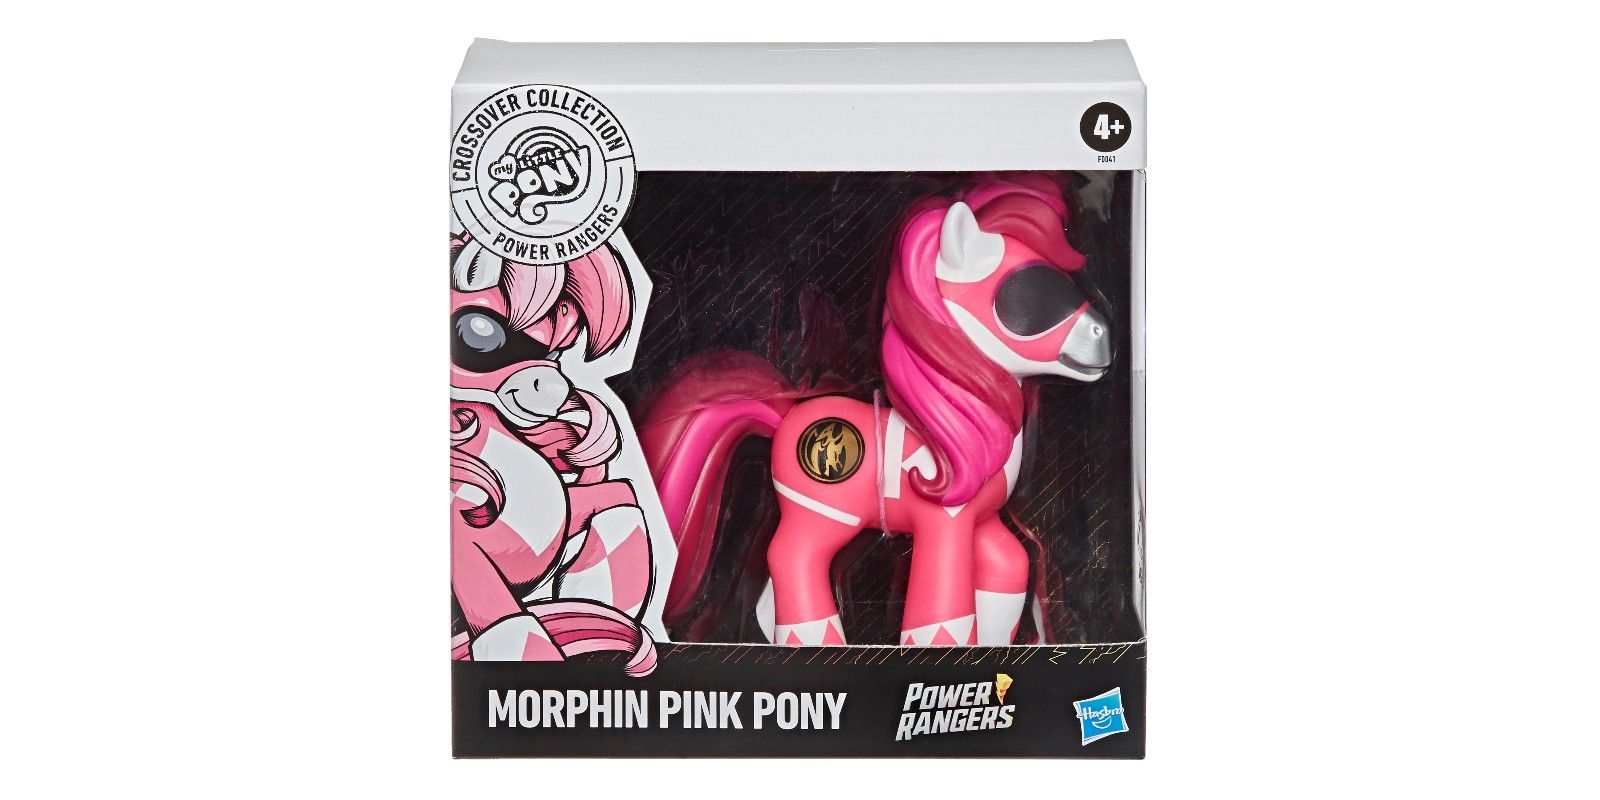 Power Rangers My Little Pony Morphin Pink Pony in Pack